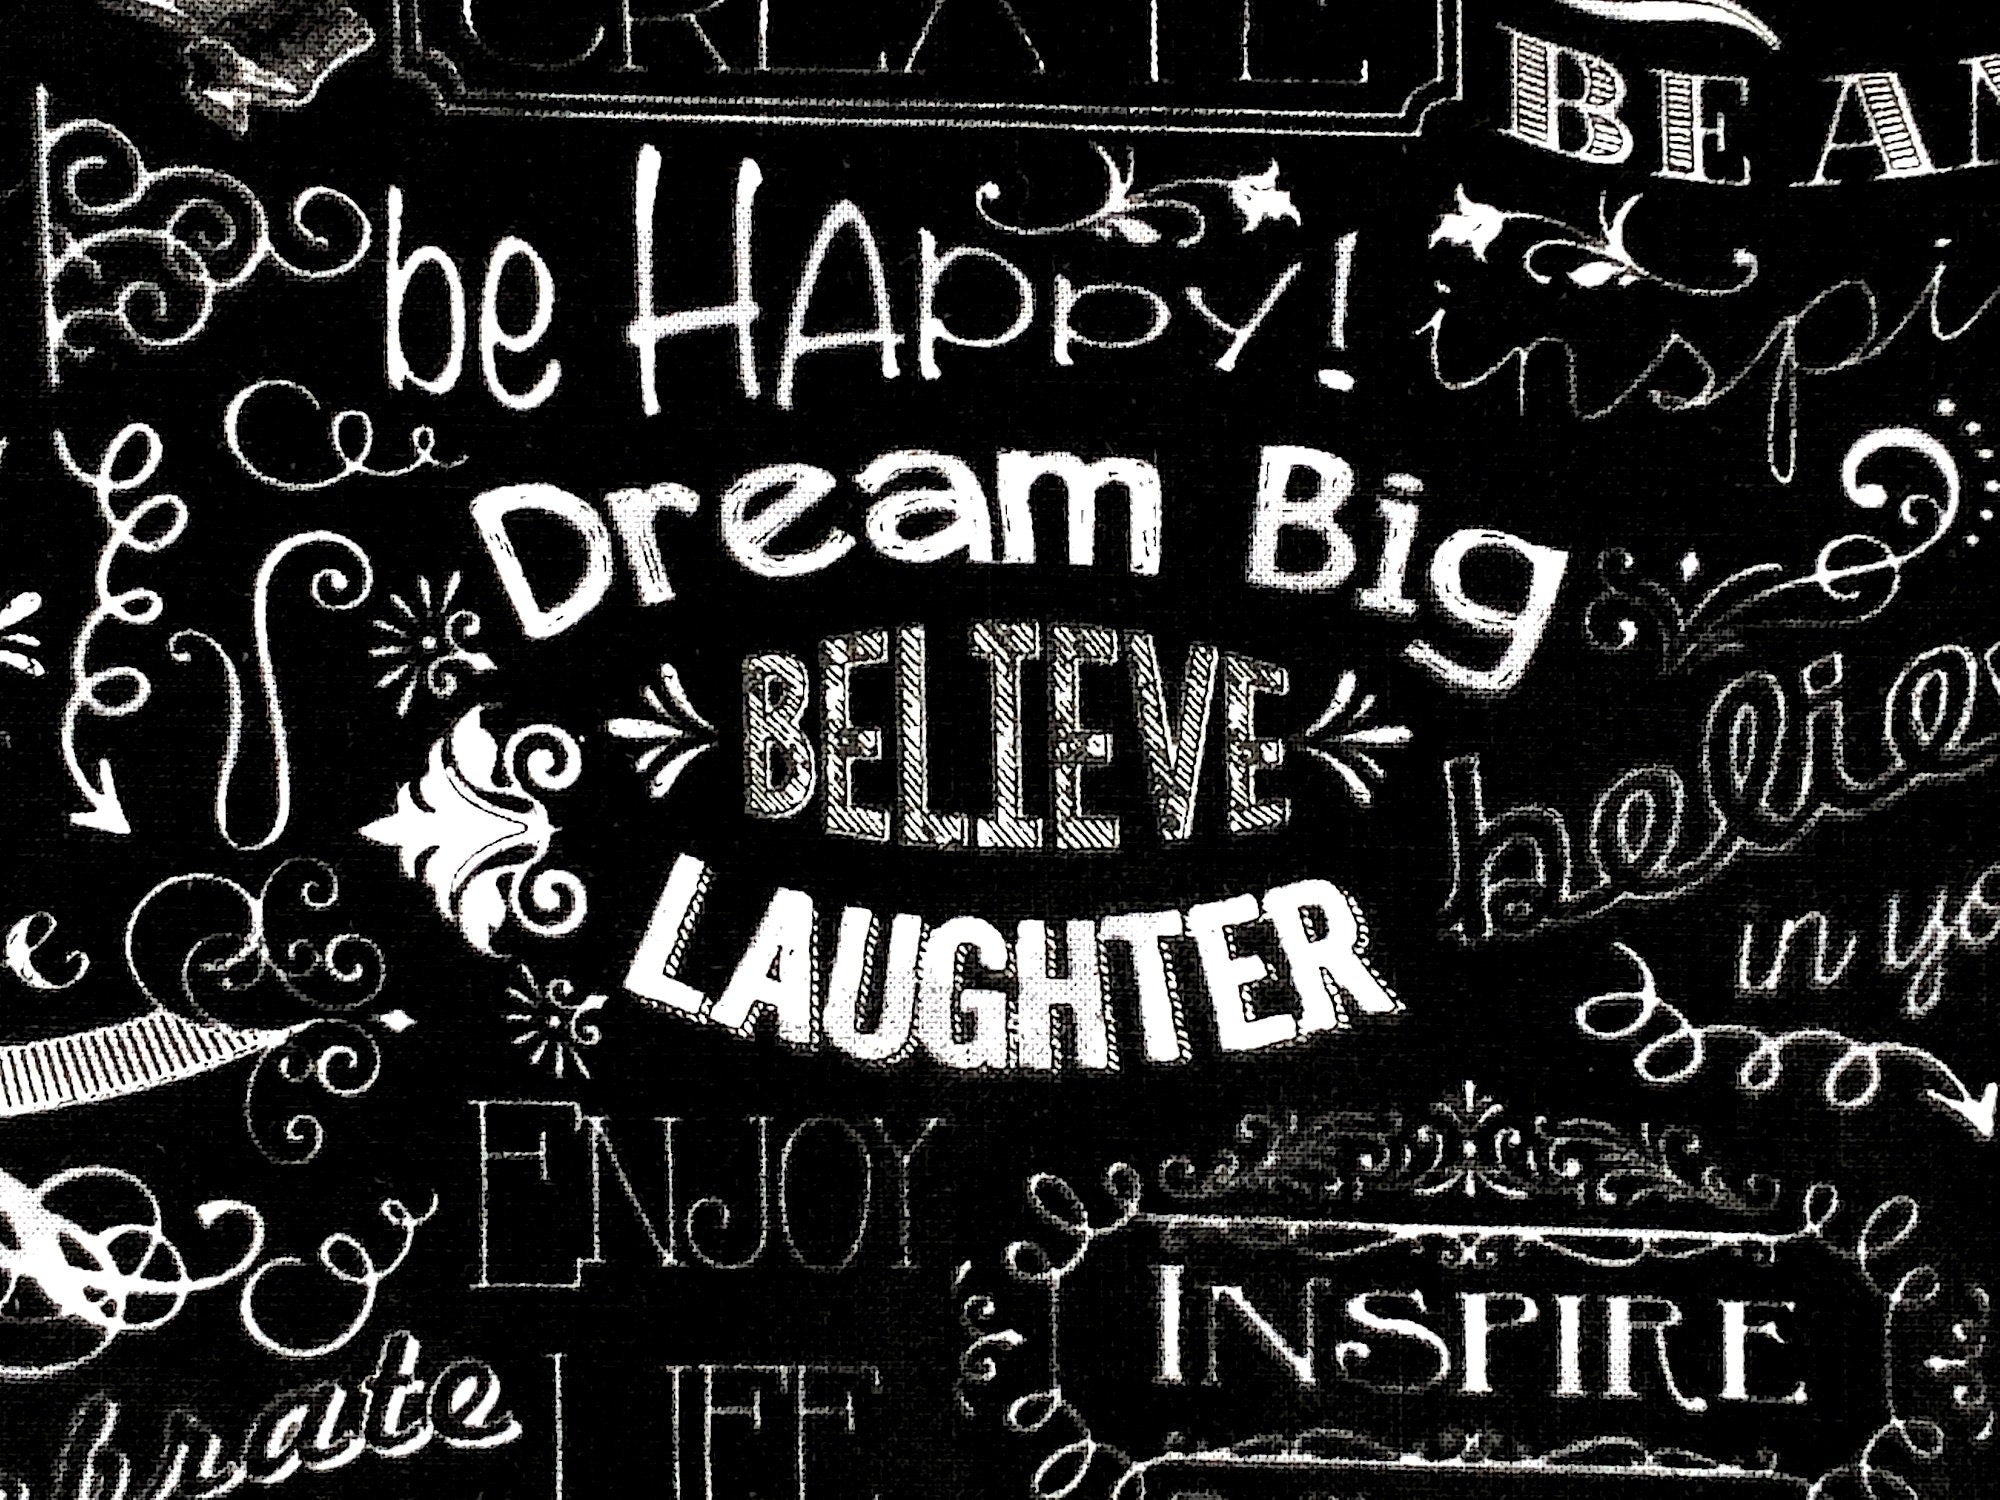 Close up of be happy, dream big, believe, laughter and more.